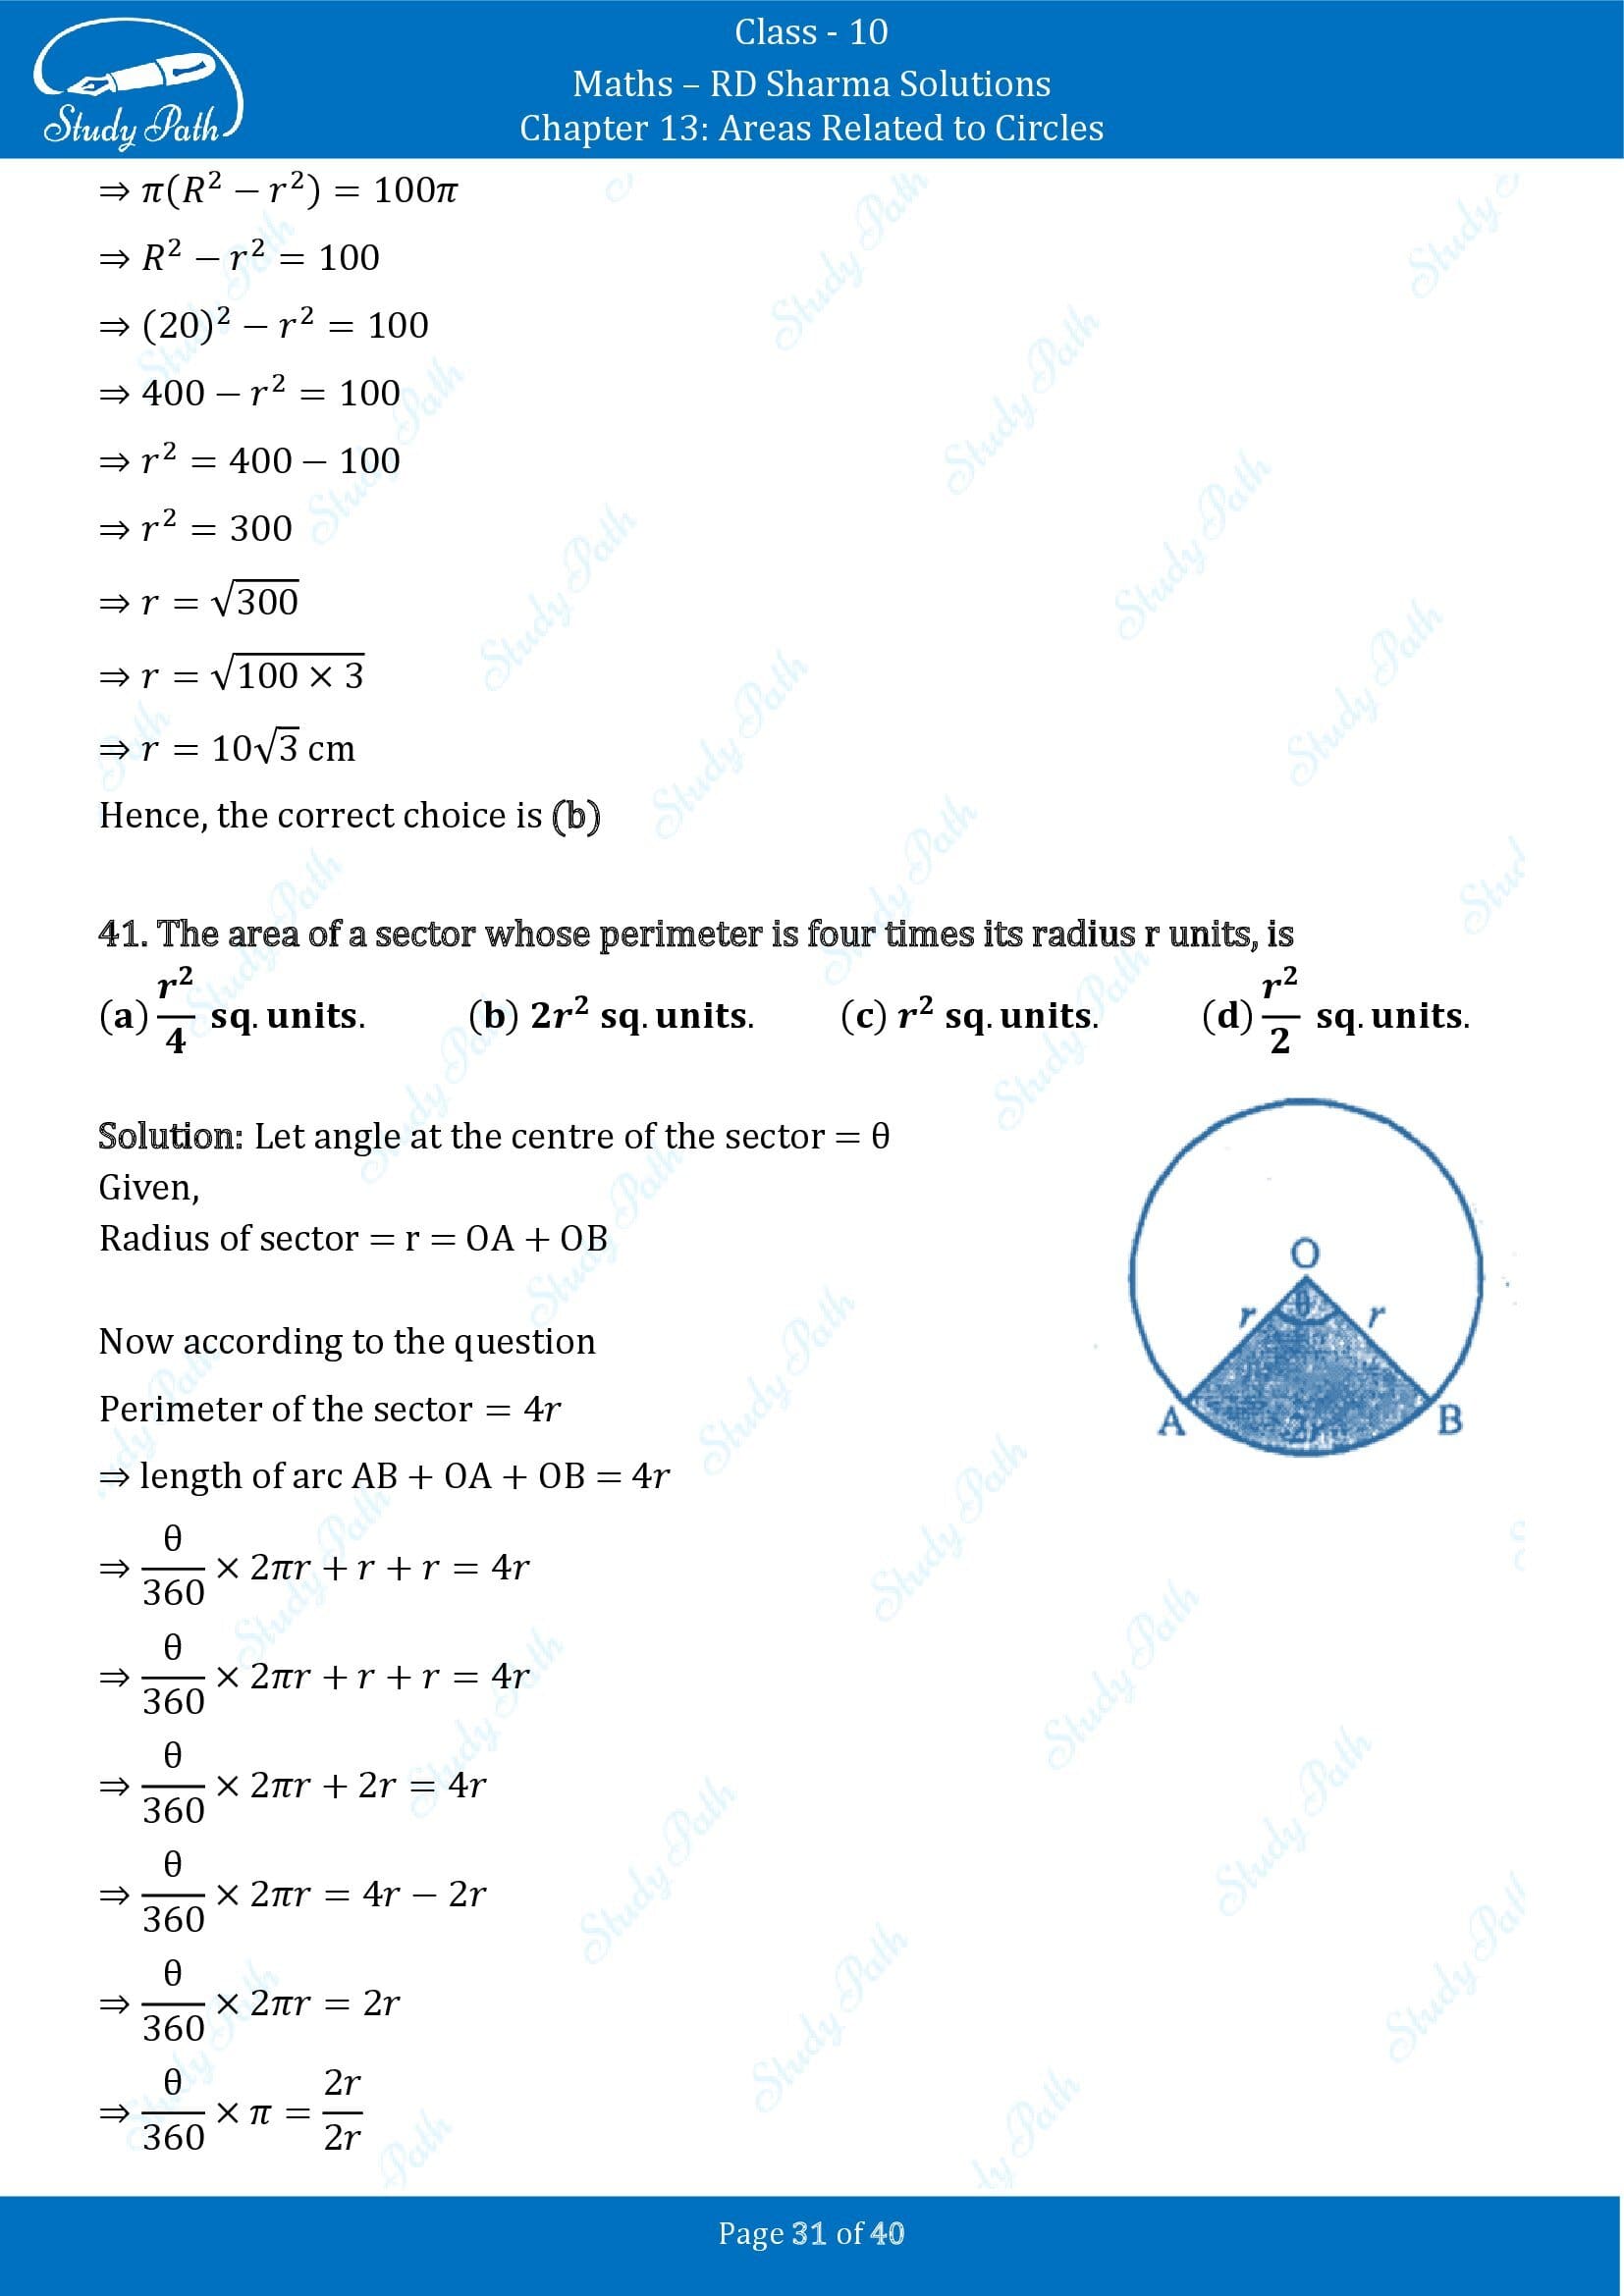 RD Sharma Solutions Class 10 Chapter 13 Areas Related to Circles Multiple Choice Question MCQs 00031